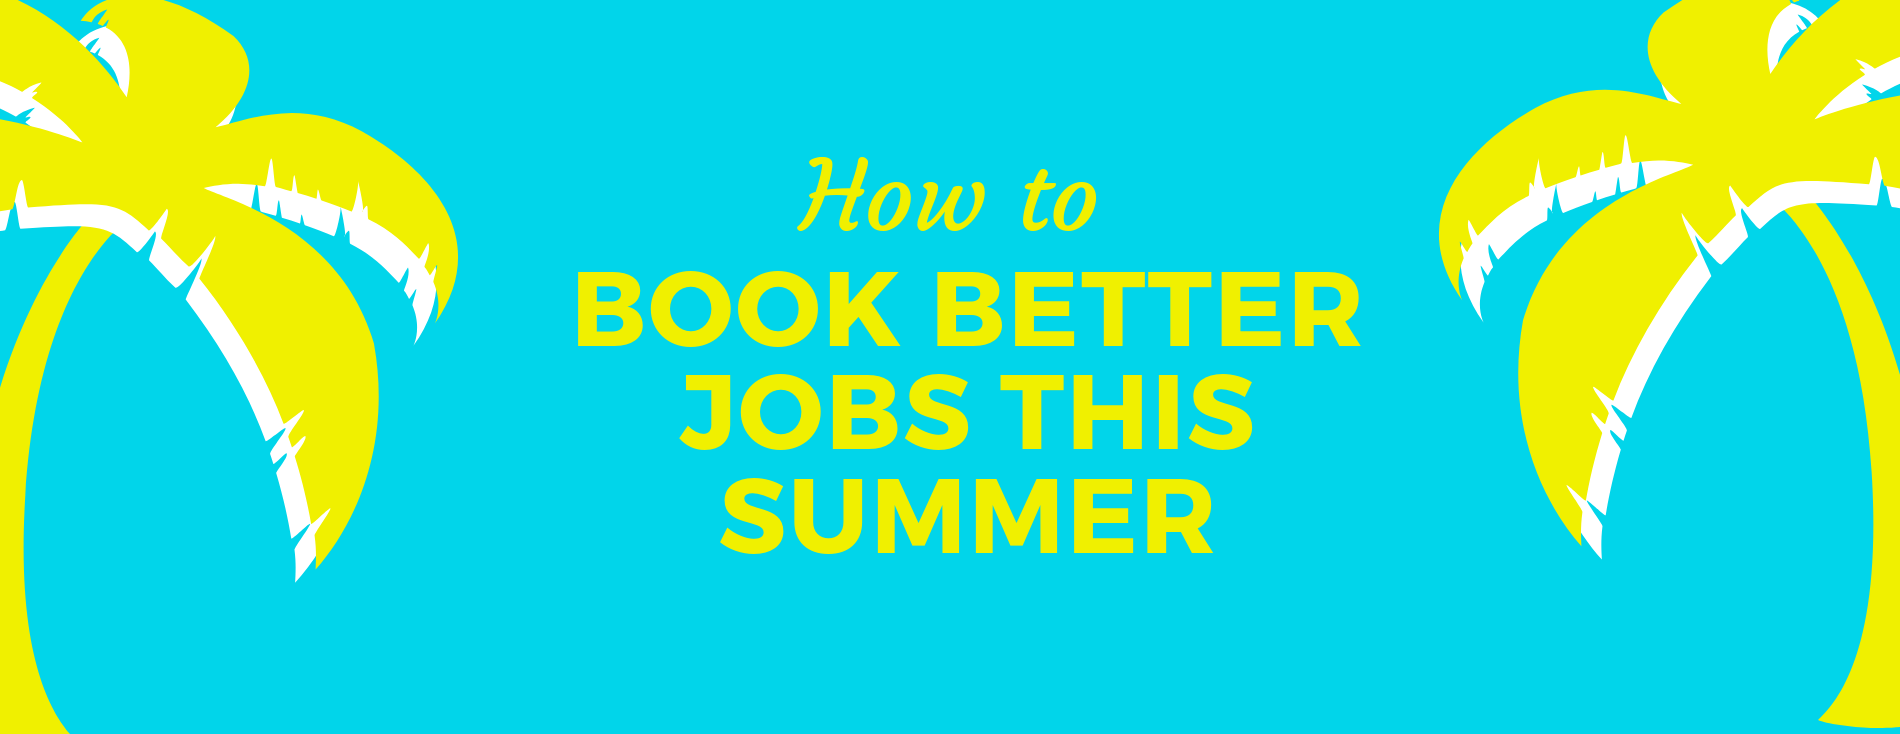 How to Book Better Jobs This Summer